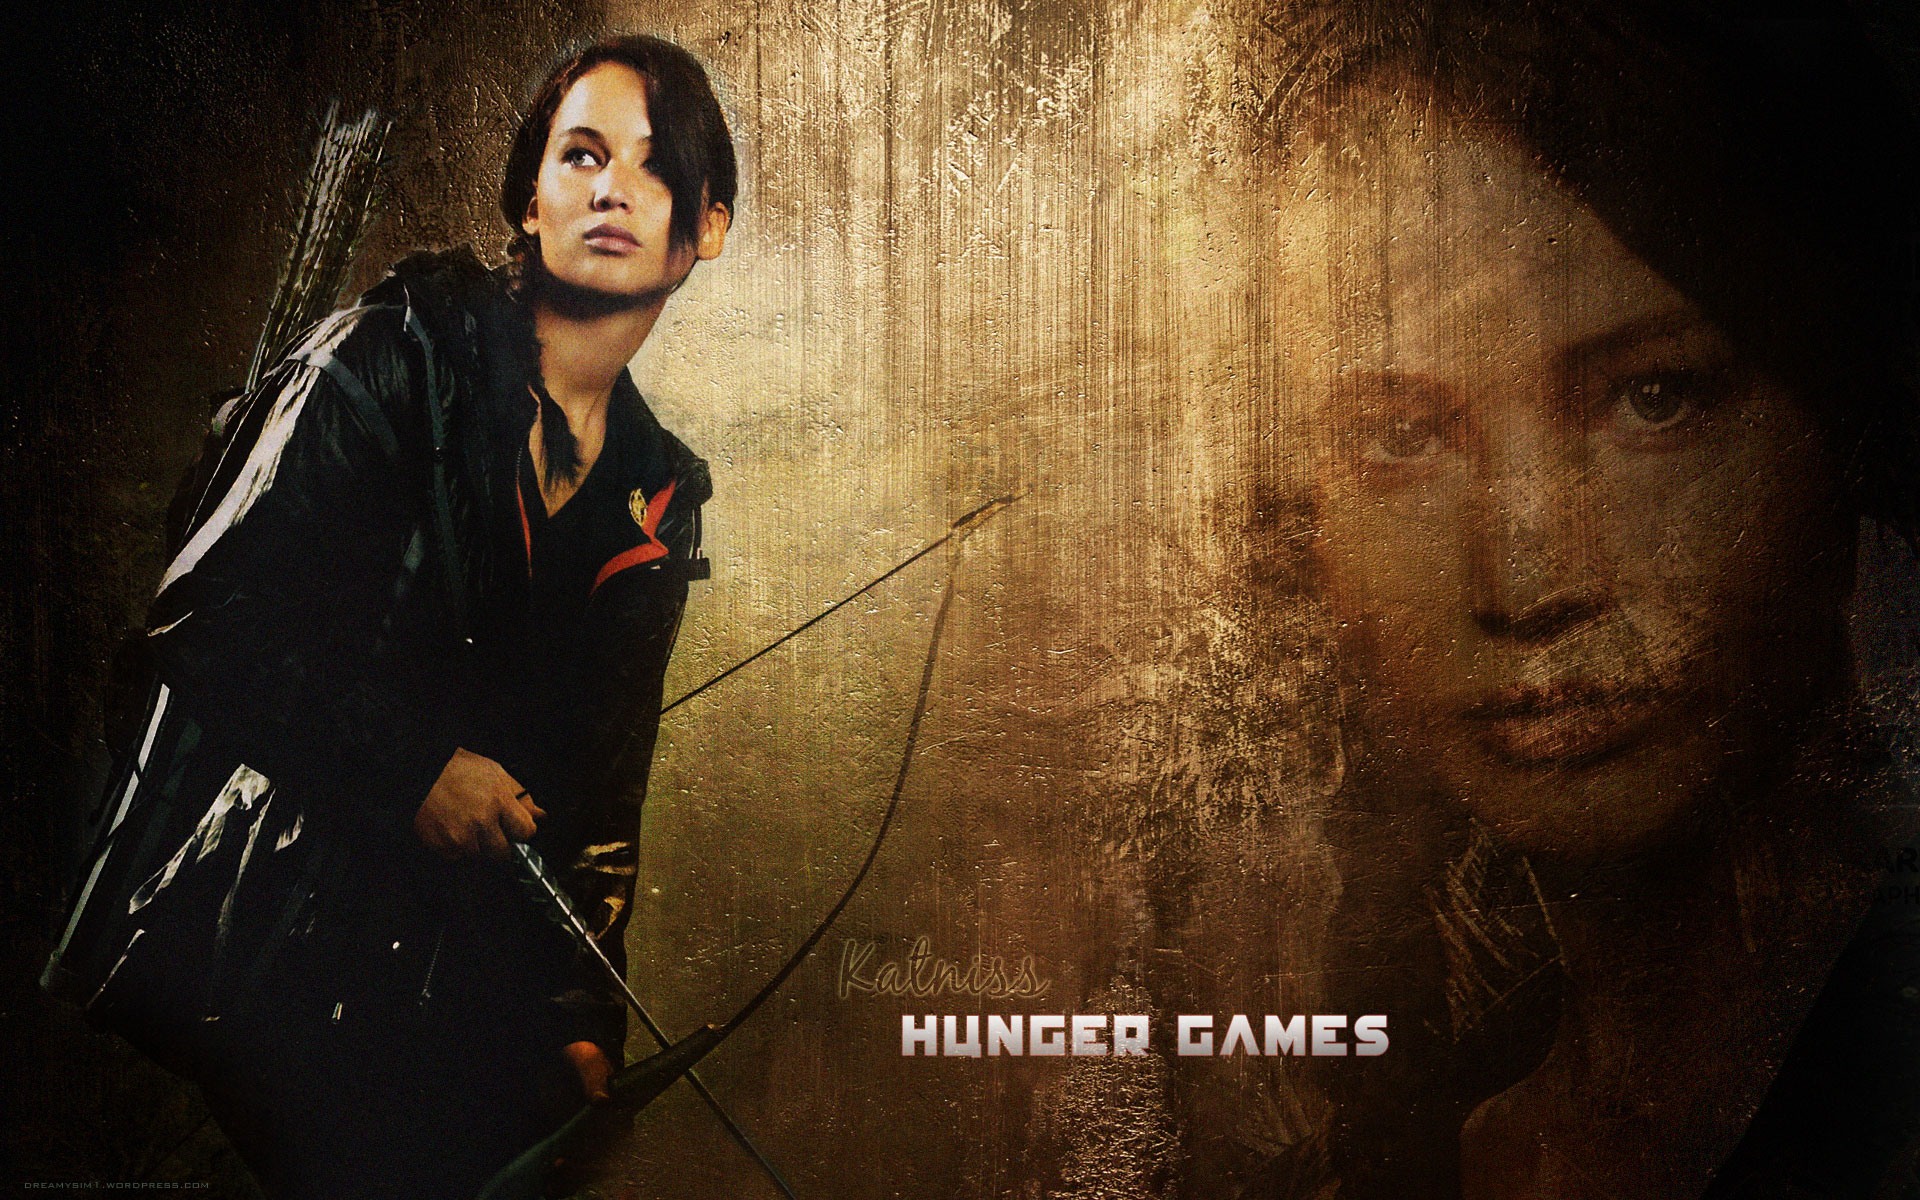 The Hunger Games HD wallpapers #8 - 1920x1200